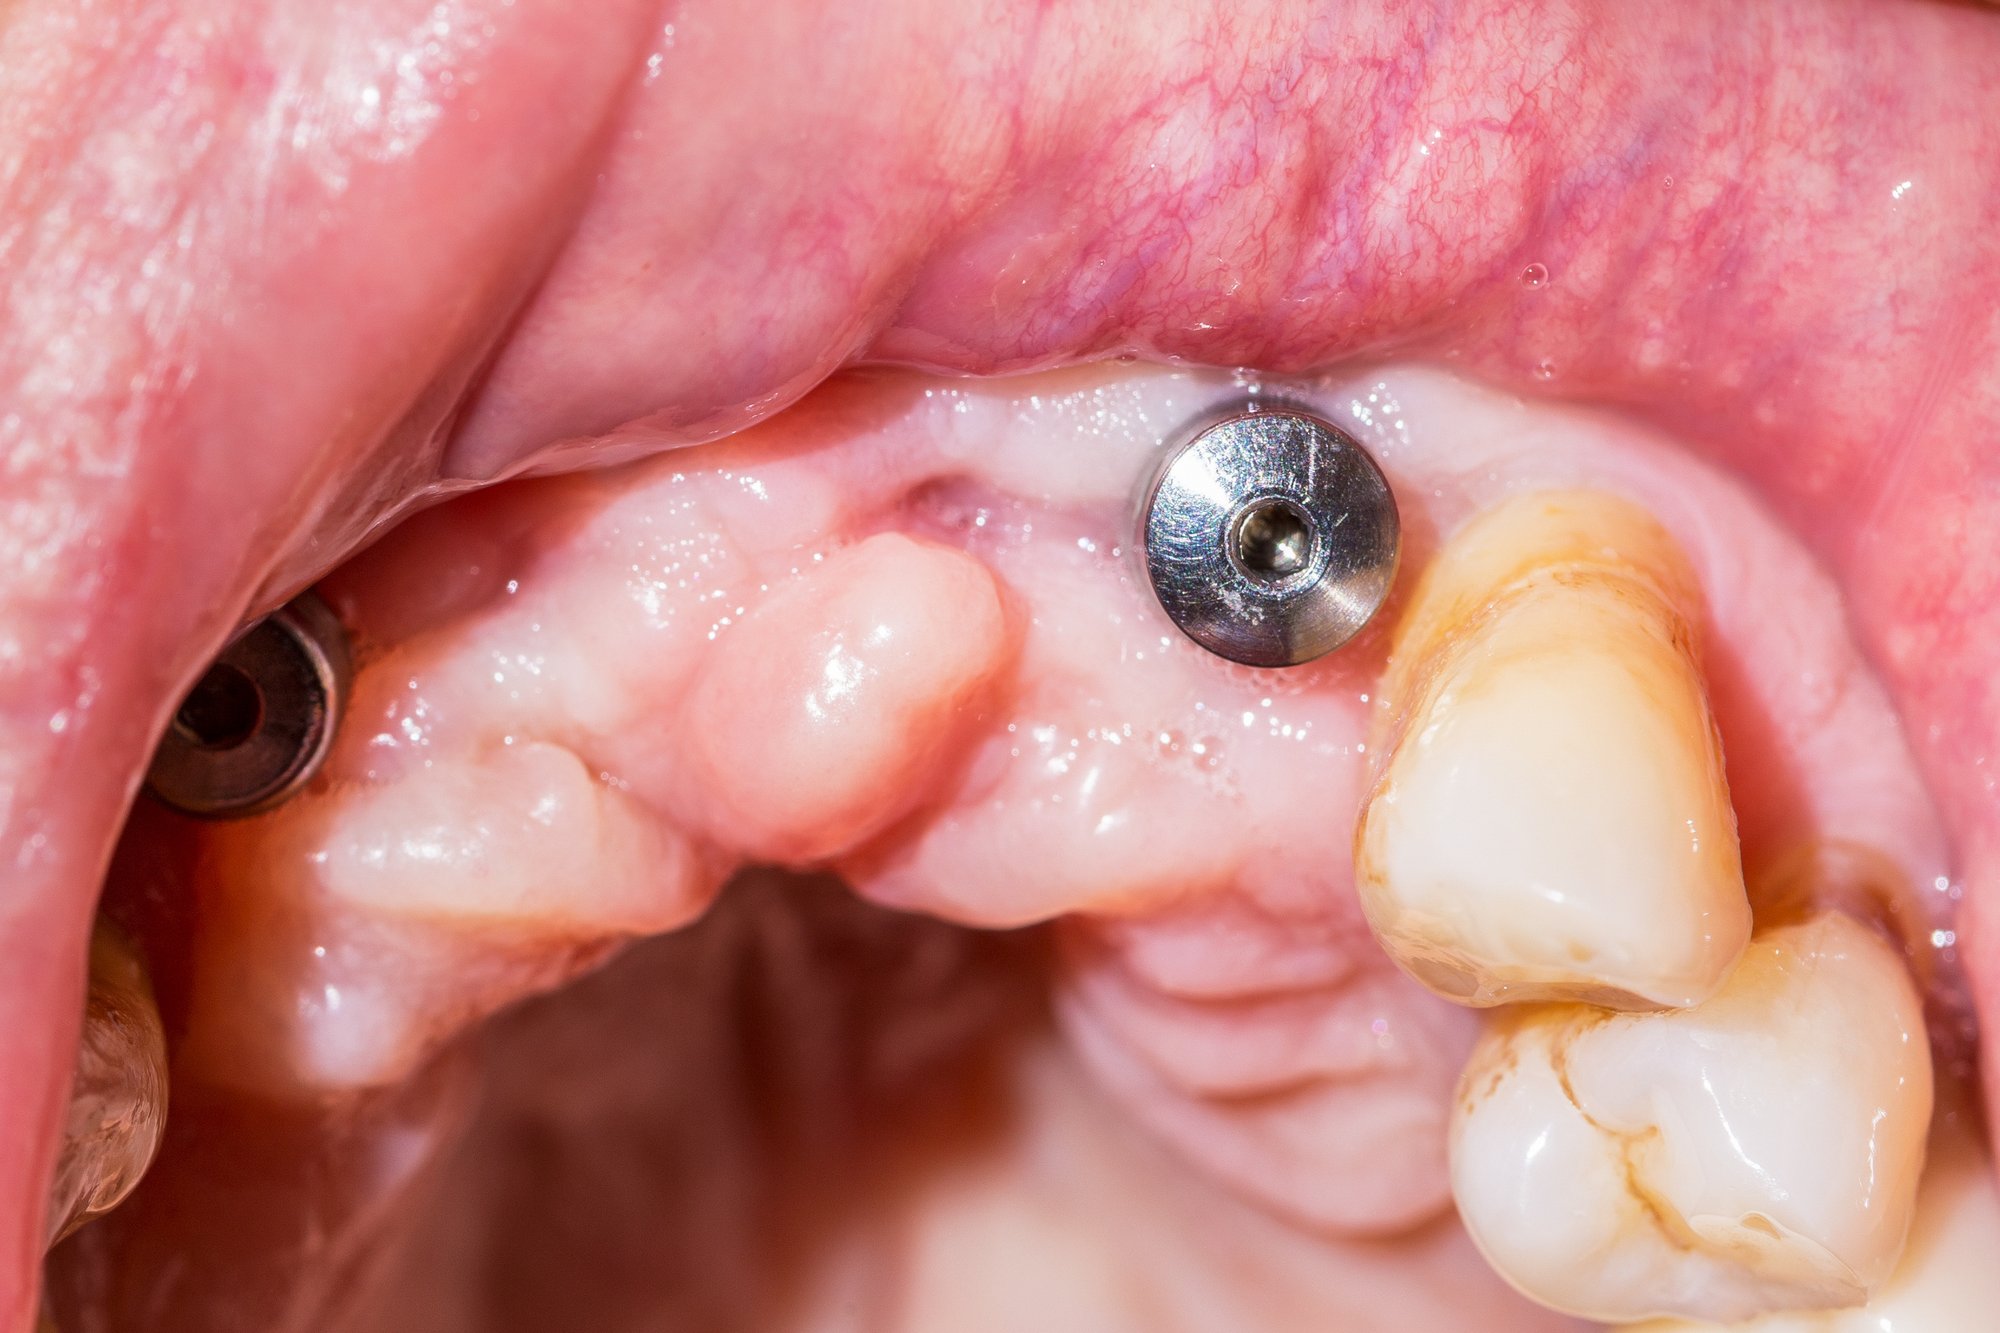 A macro shot of dental implant in the mouth of a patient with advanced periodontitis